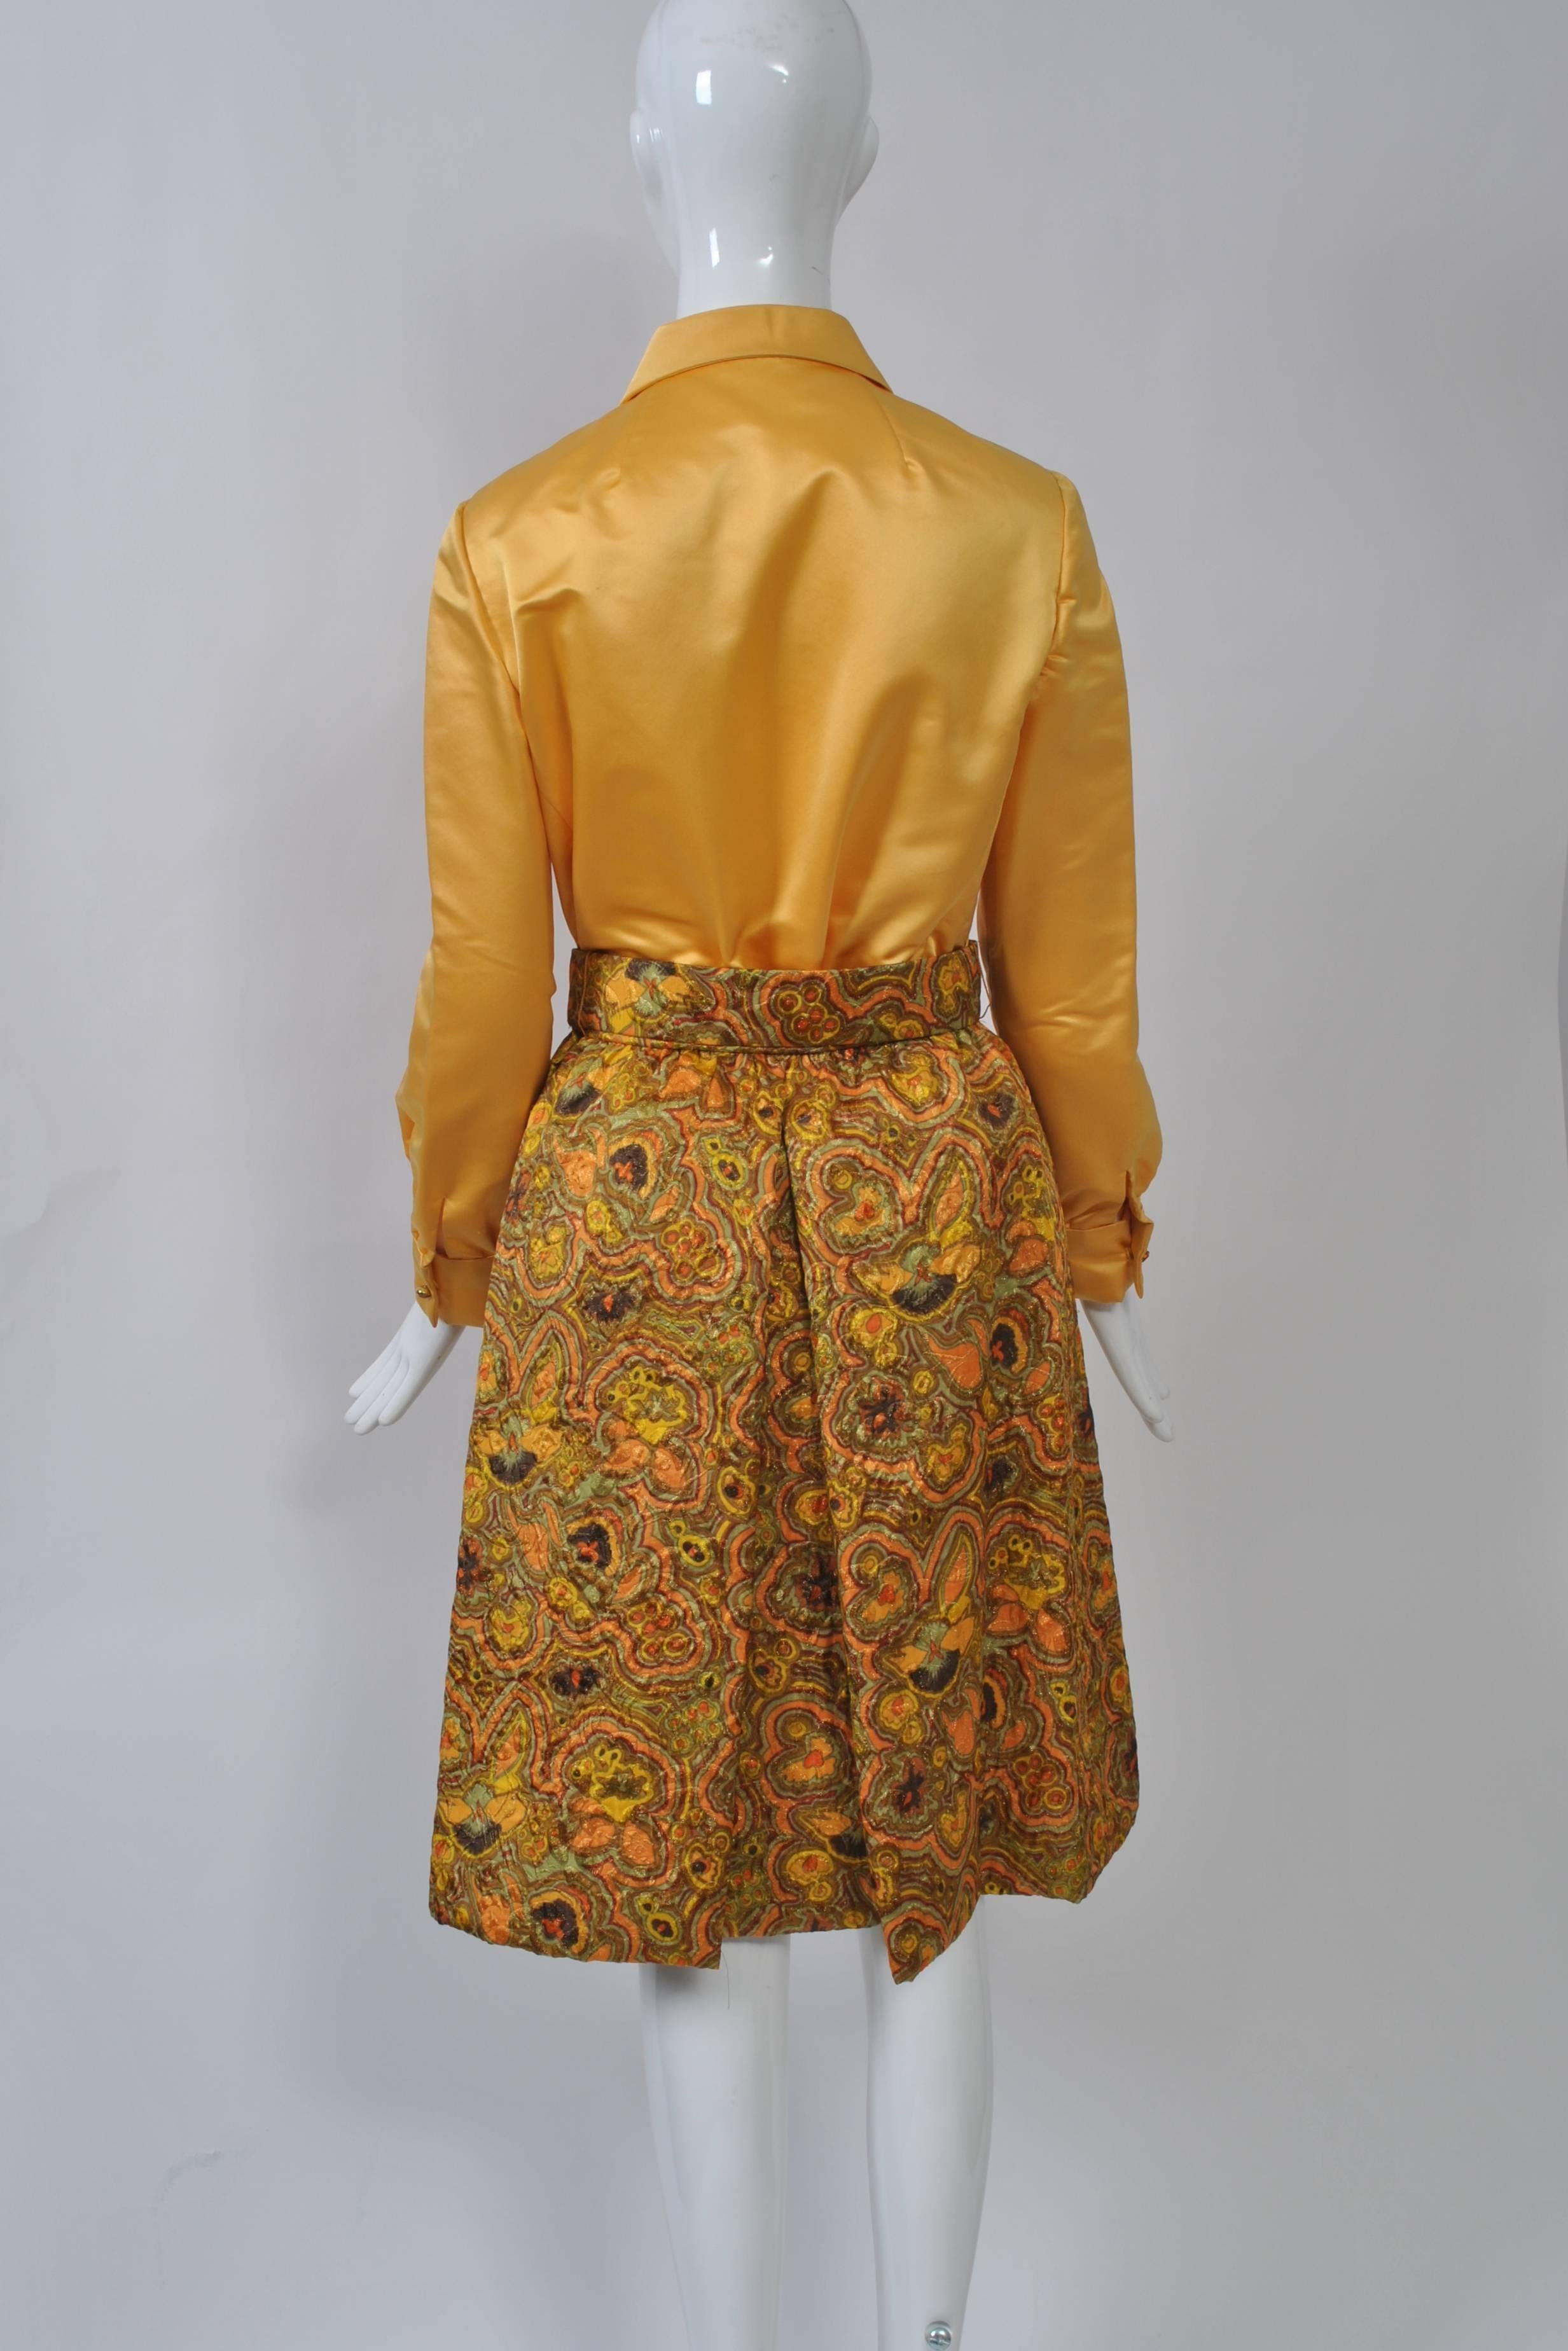 Luxurious fabrics and beautiful construction define this 1960s evening skirt and blouse ensemble by Adele Simpson. The top is fashioned like a shirt, but in a rich gold satin, and has a front placket with false gem buttons closed by snaps